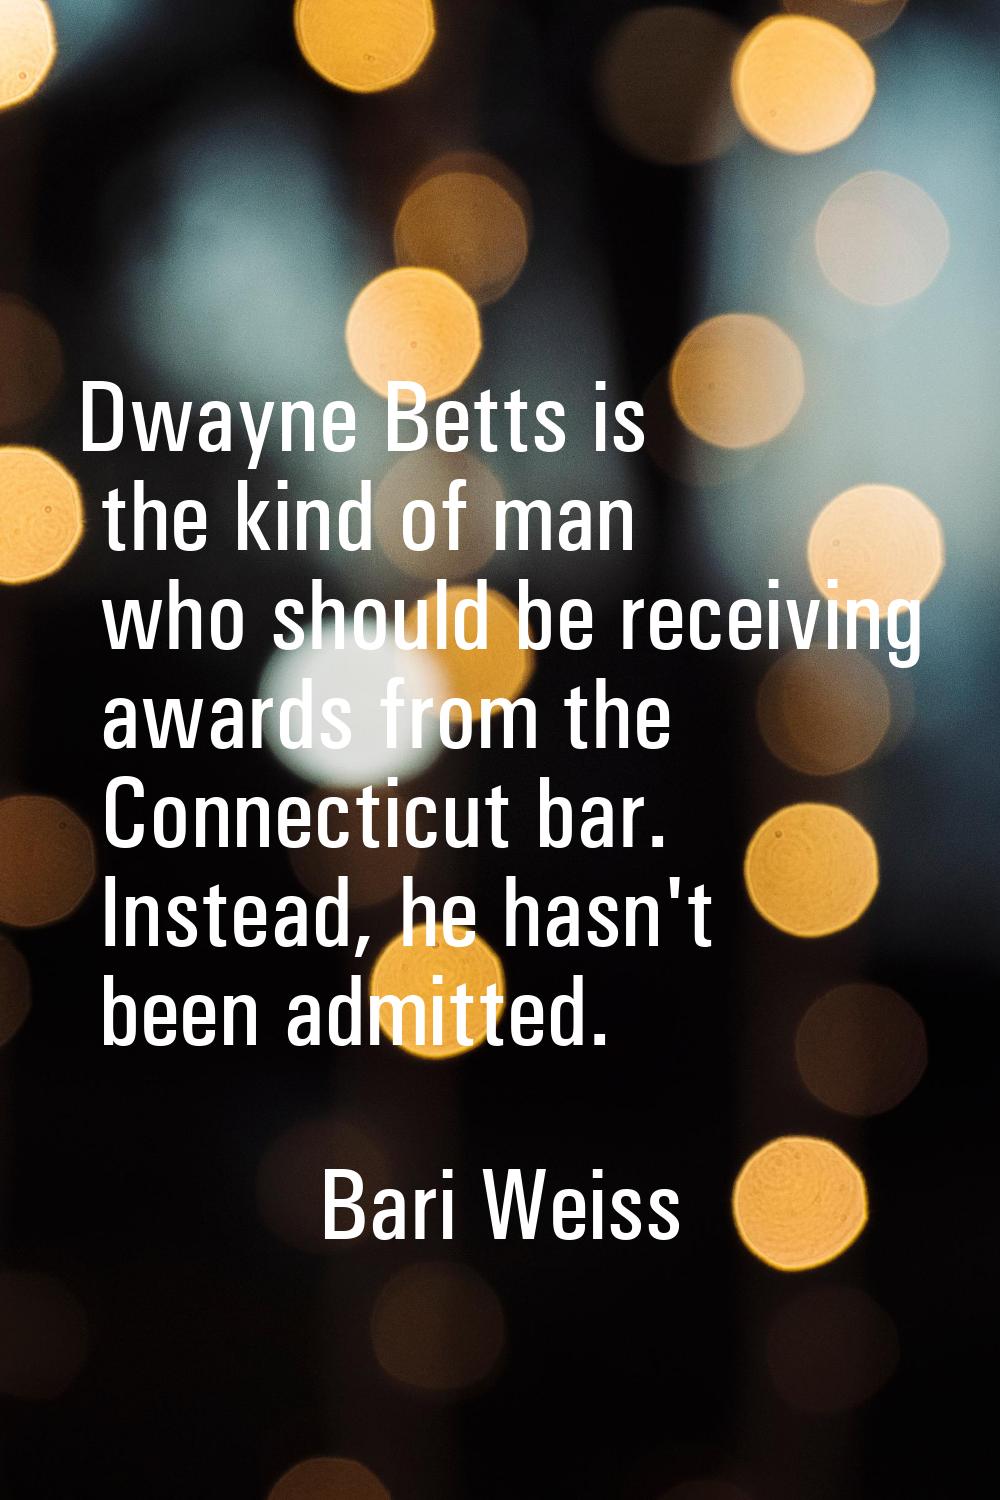 Dwayne Betts is the kind of man who should be receiving awards from the Connecticut bar. Instead, h